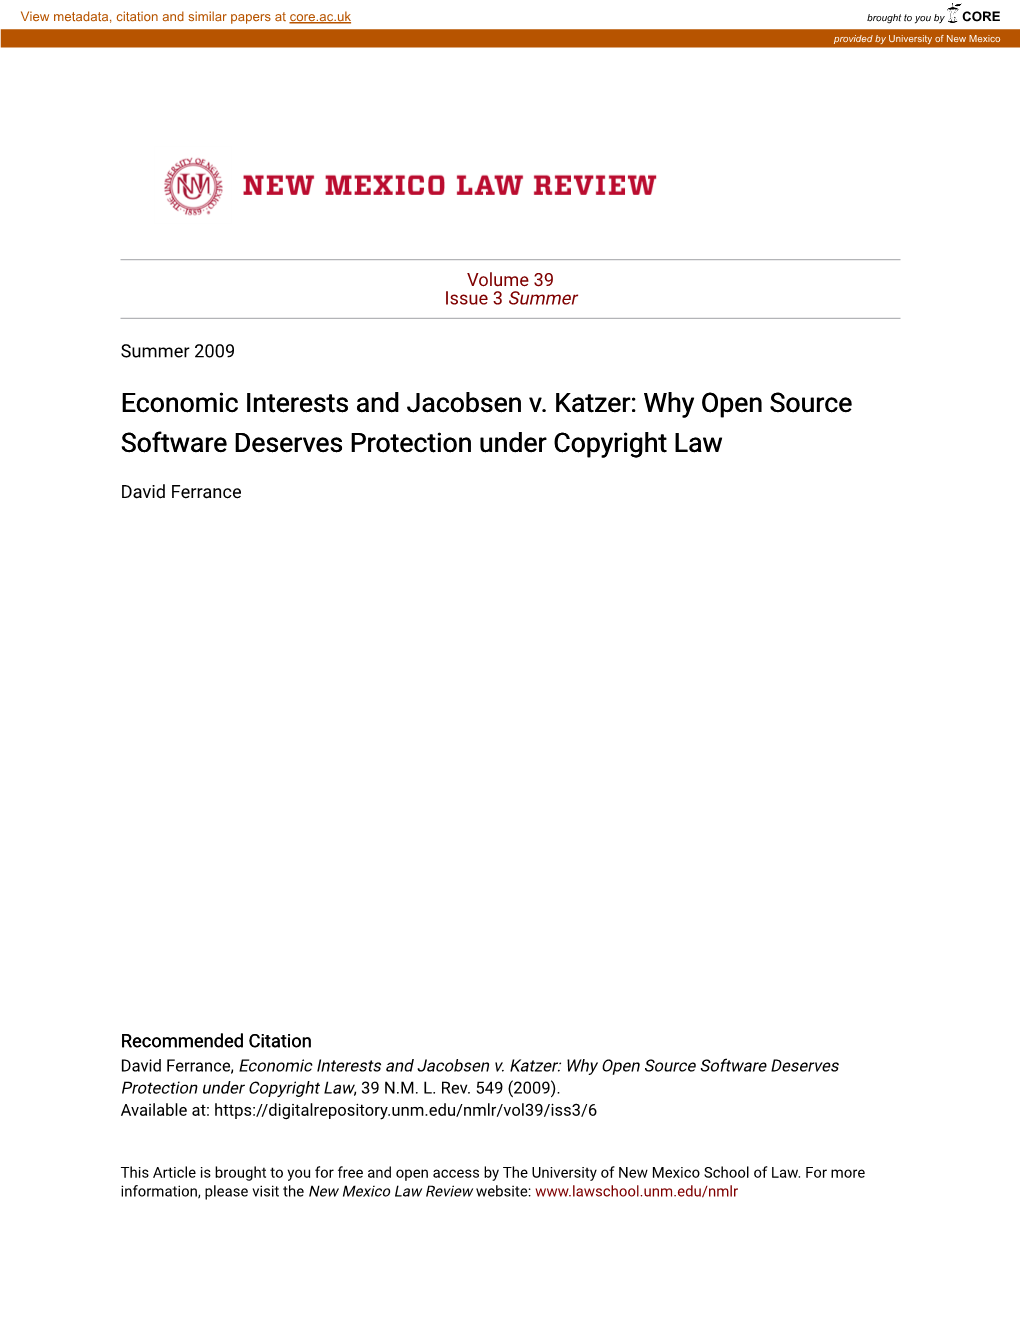 Economic Interests and Jacobsen V. Katzer: Why Open Source Software Deserves Protection Under Copyright Law